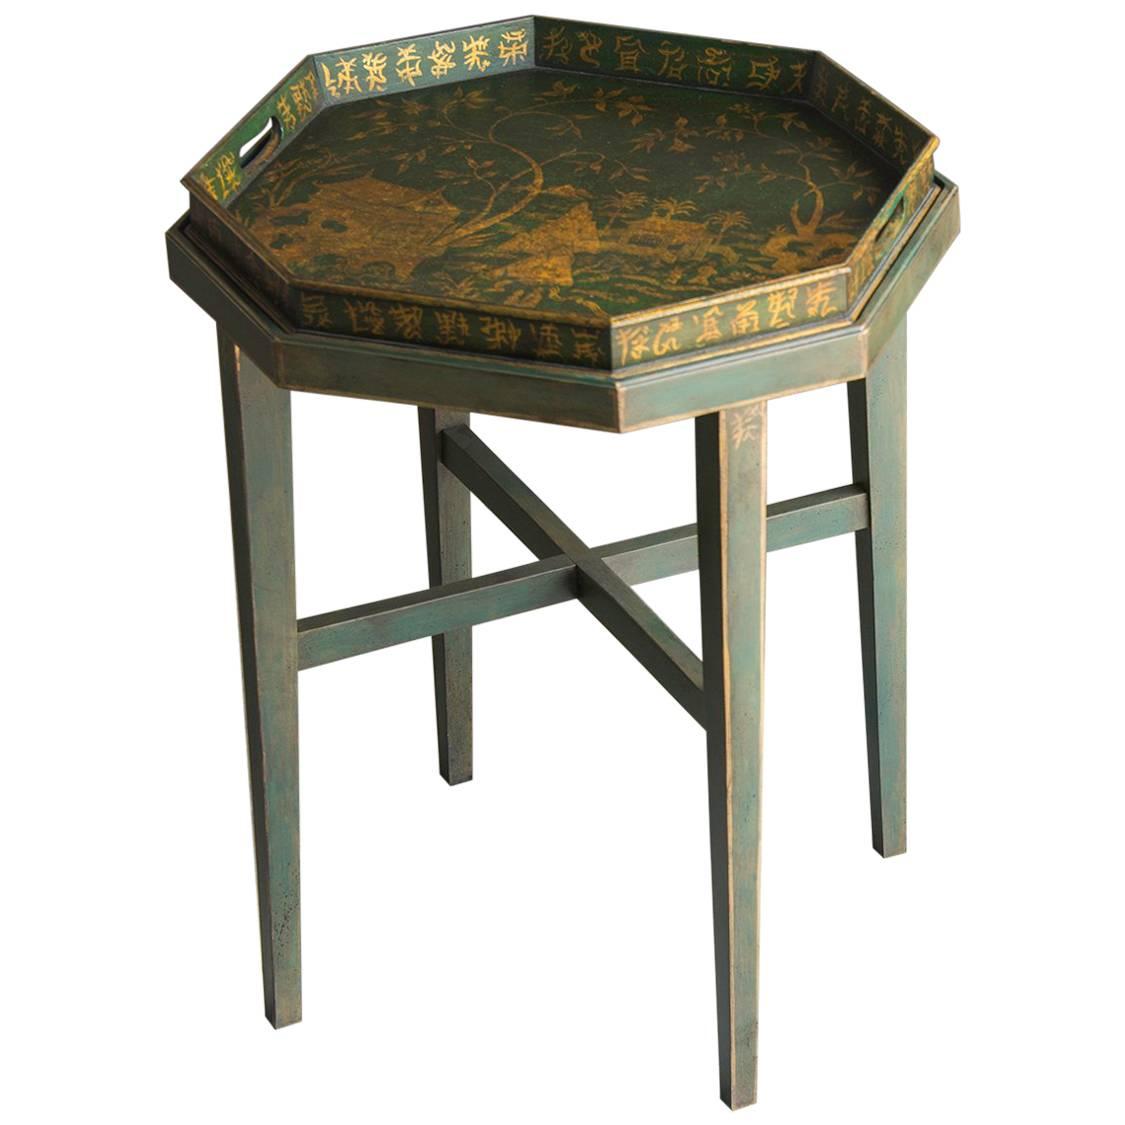 Antique English Chinoiserie Painted, Gilded Octagonal Tray Coffee Table